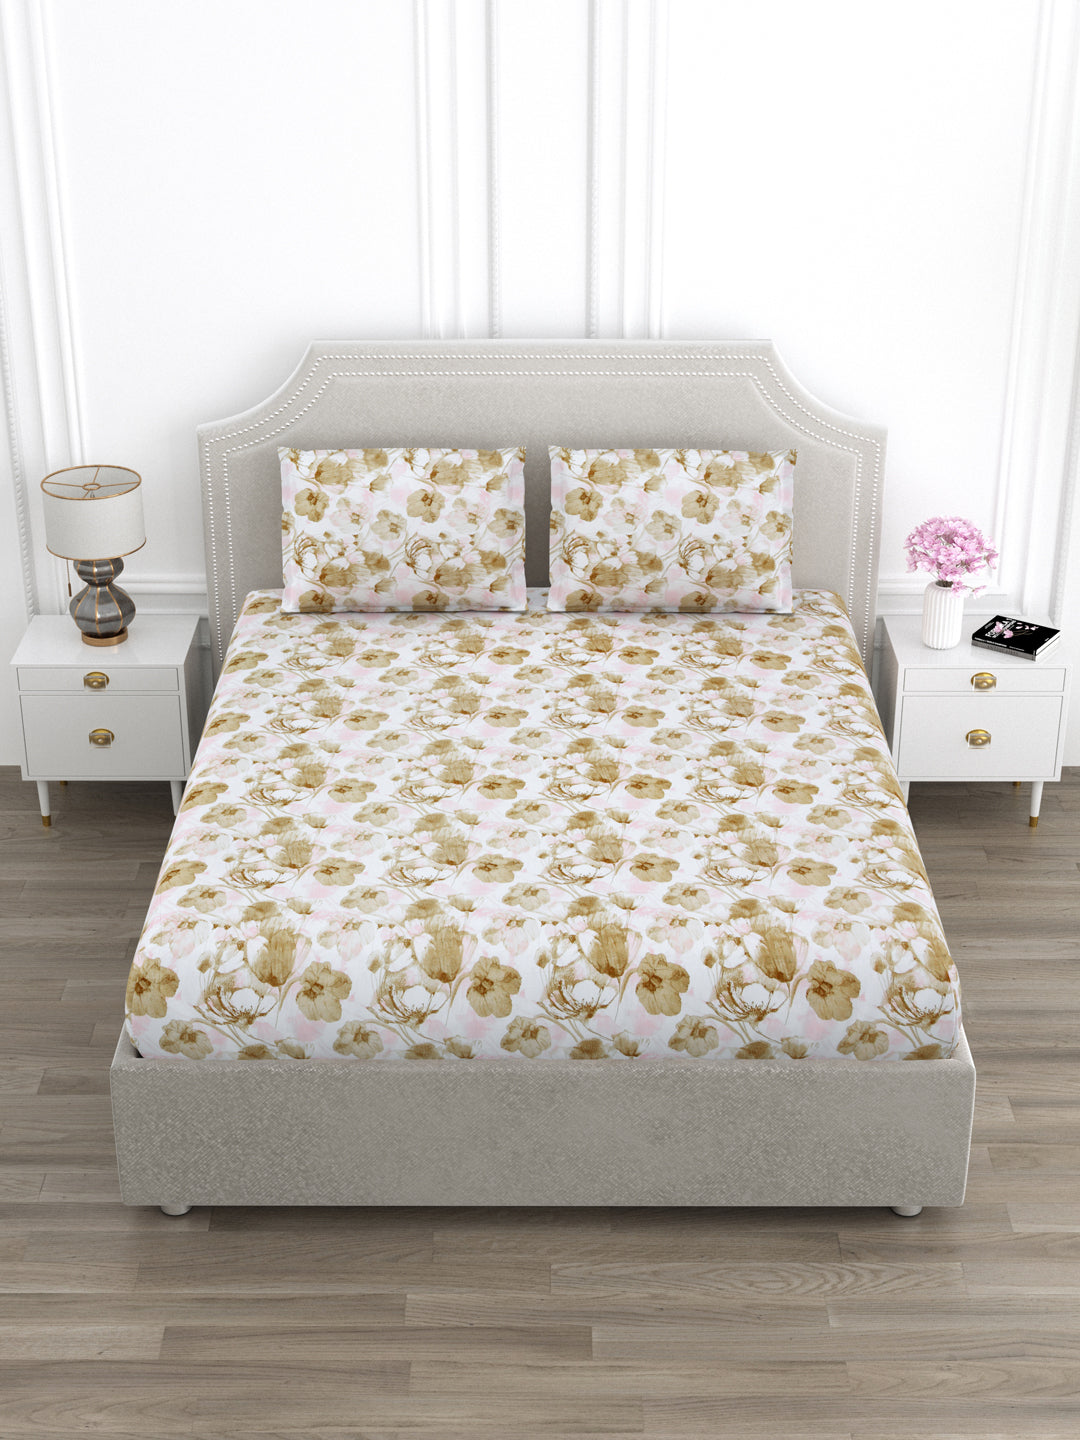 Brown Floral King Size Bed Cotton Linen